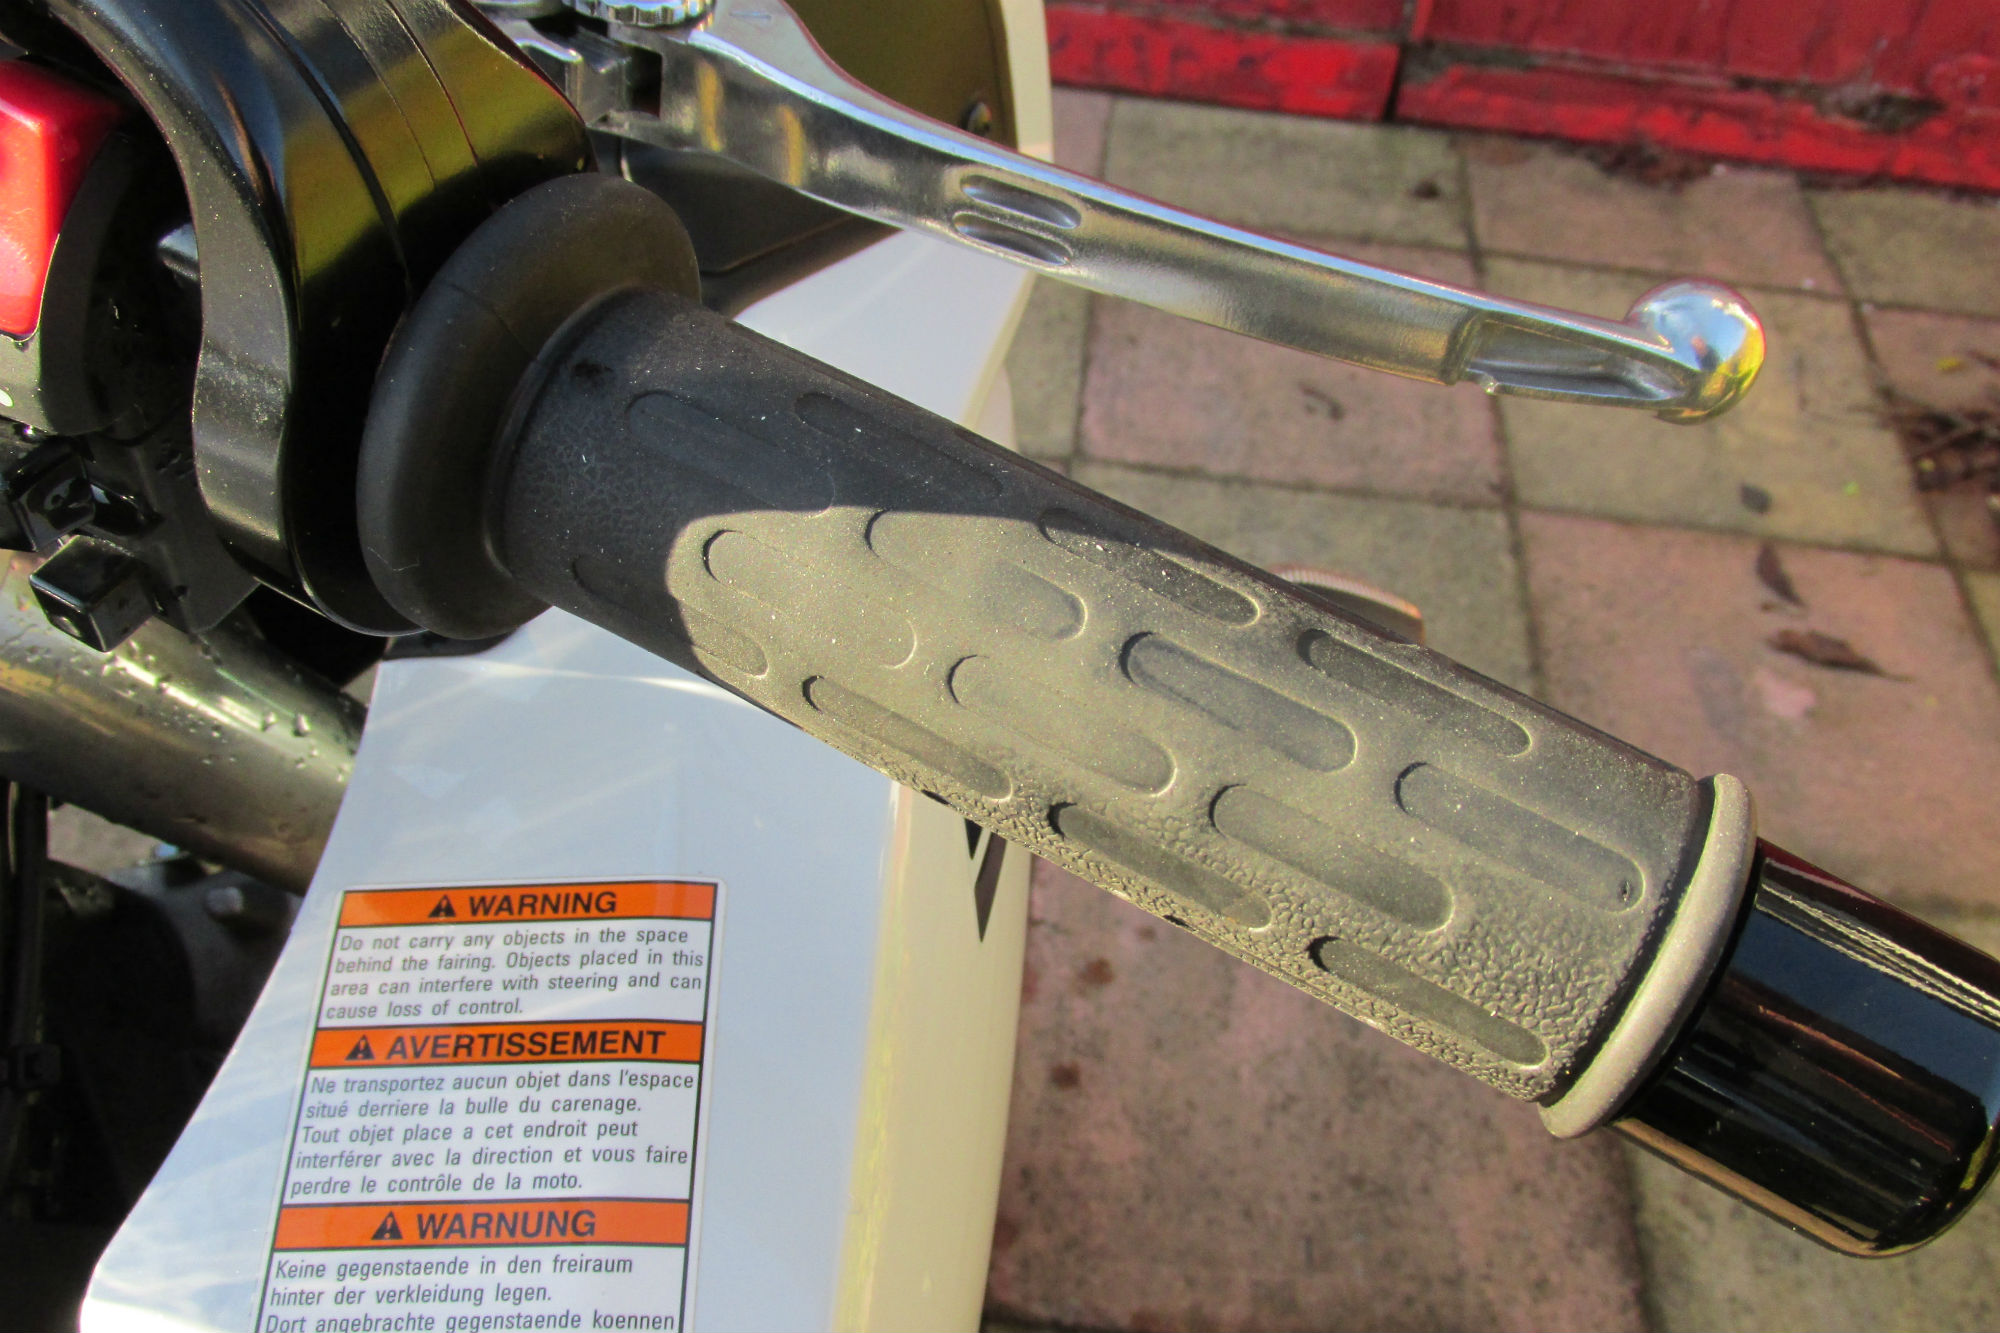 Used review: R&G heated grips, £40